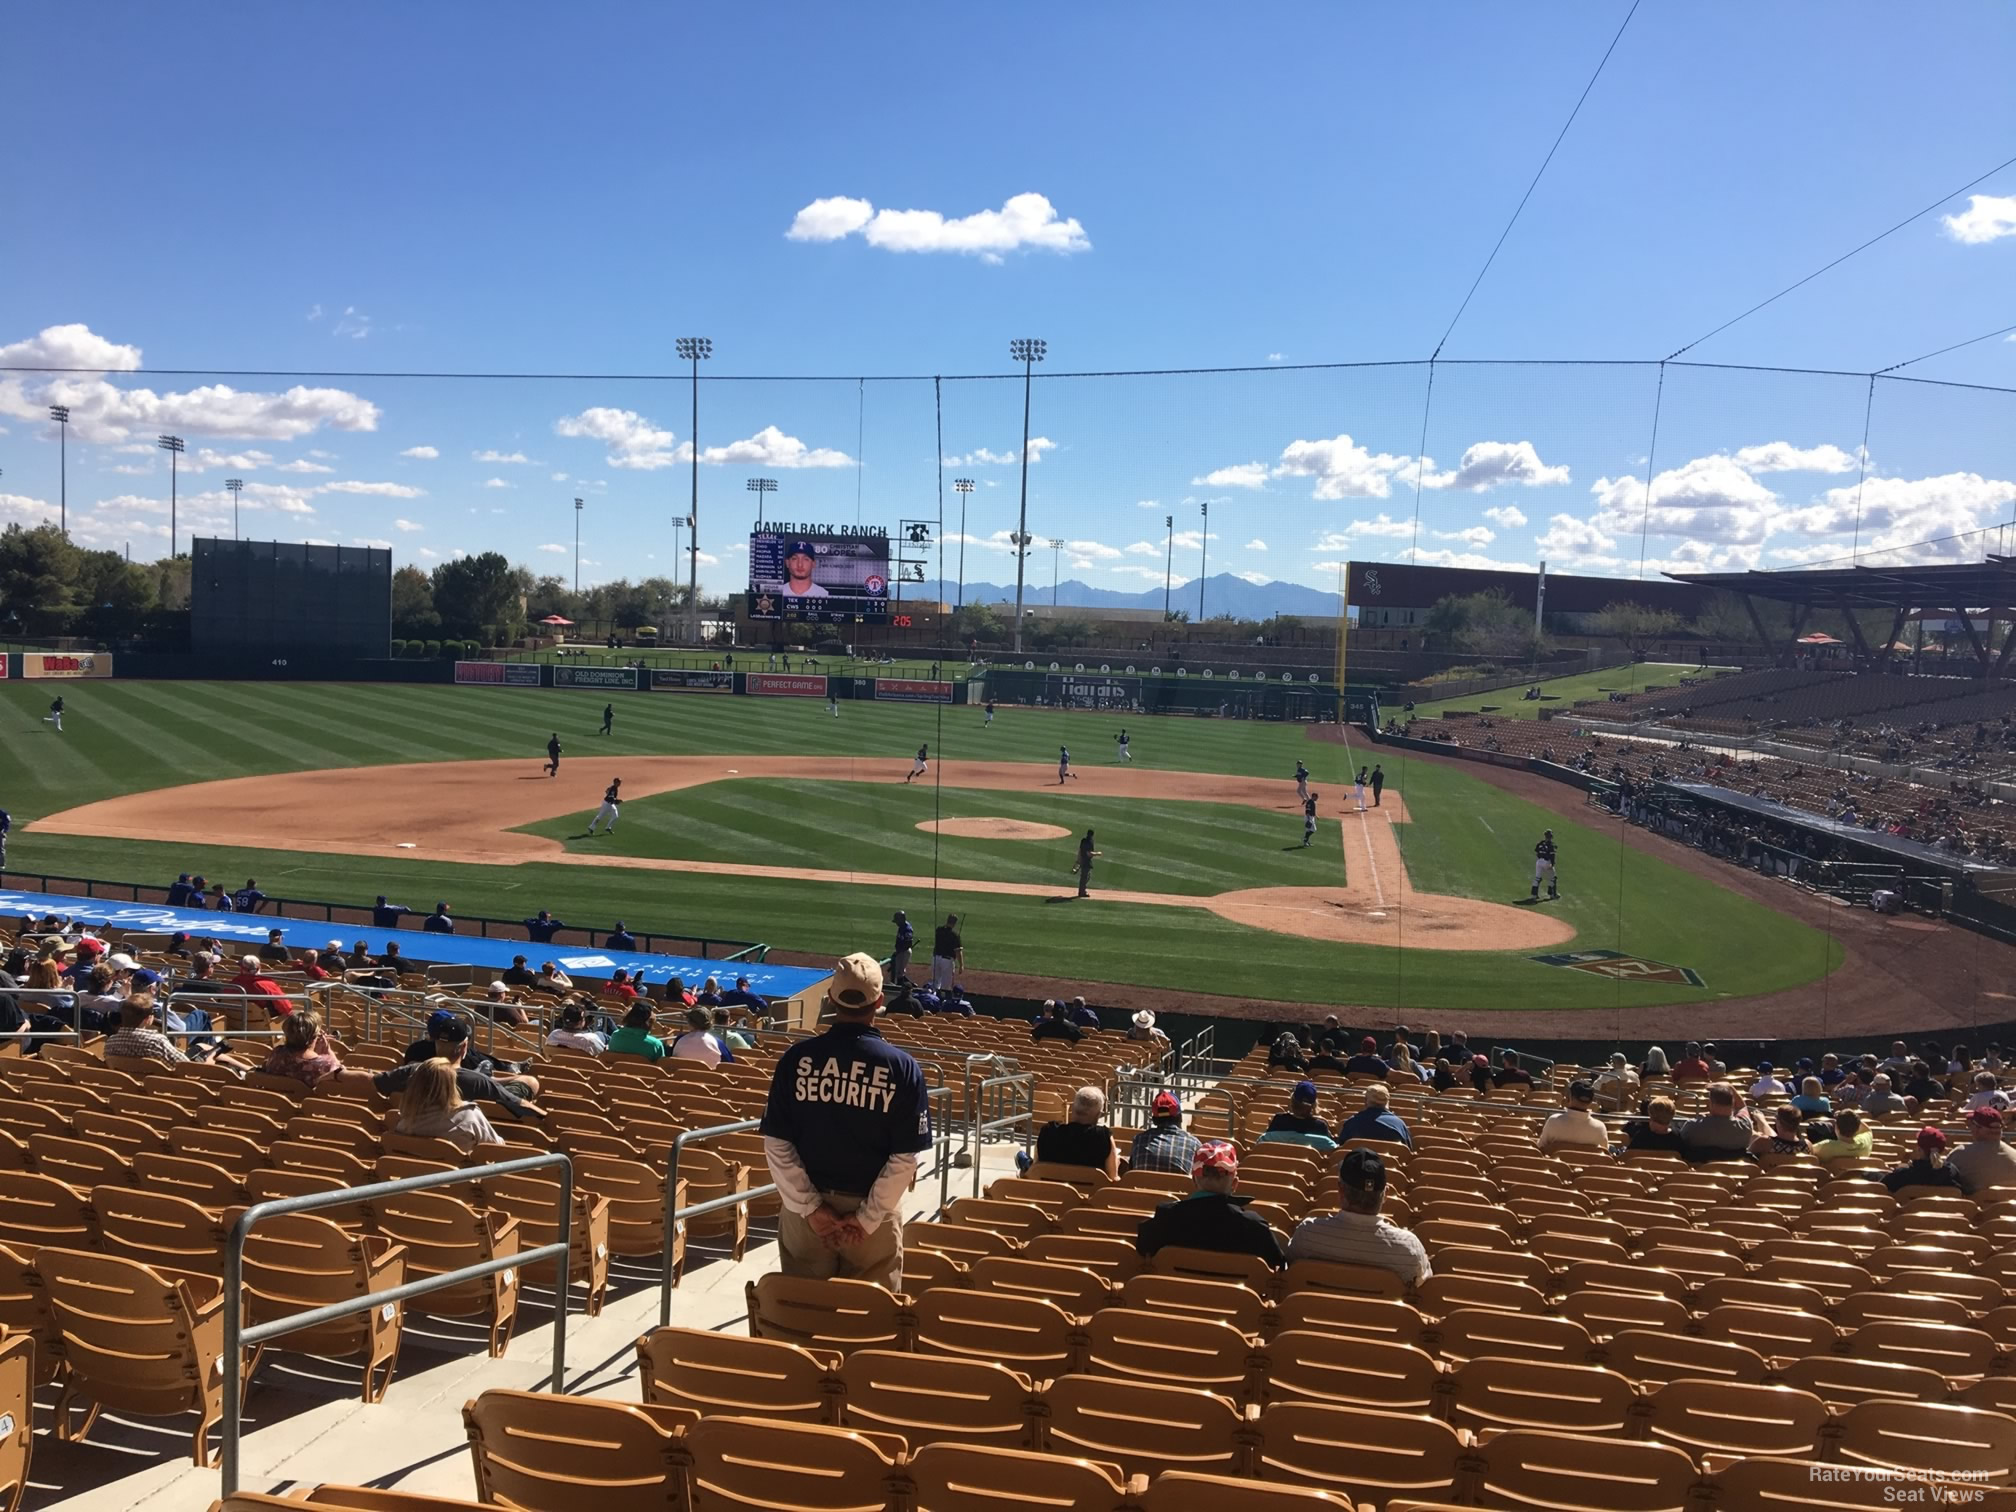 section 118, row 18 seat view  - camelback ranch